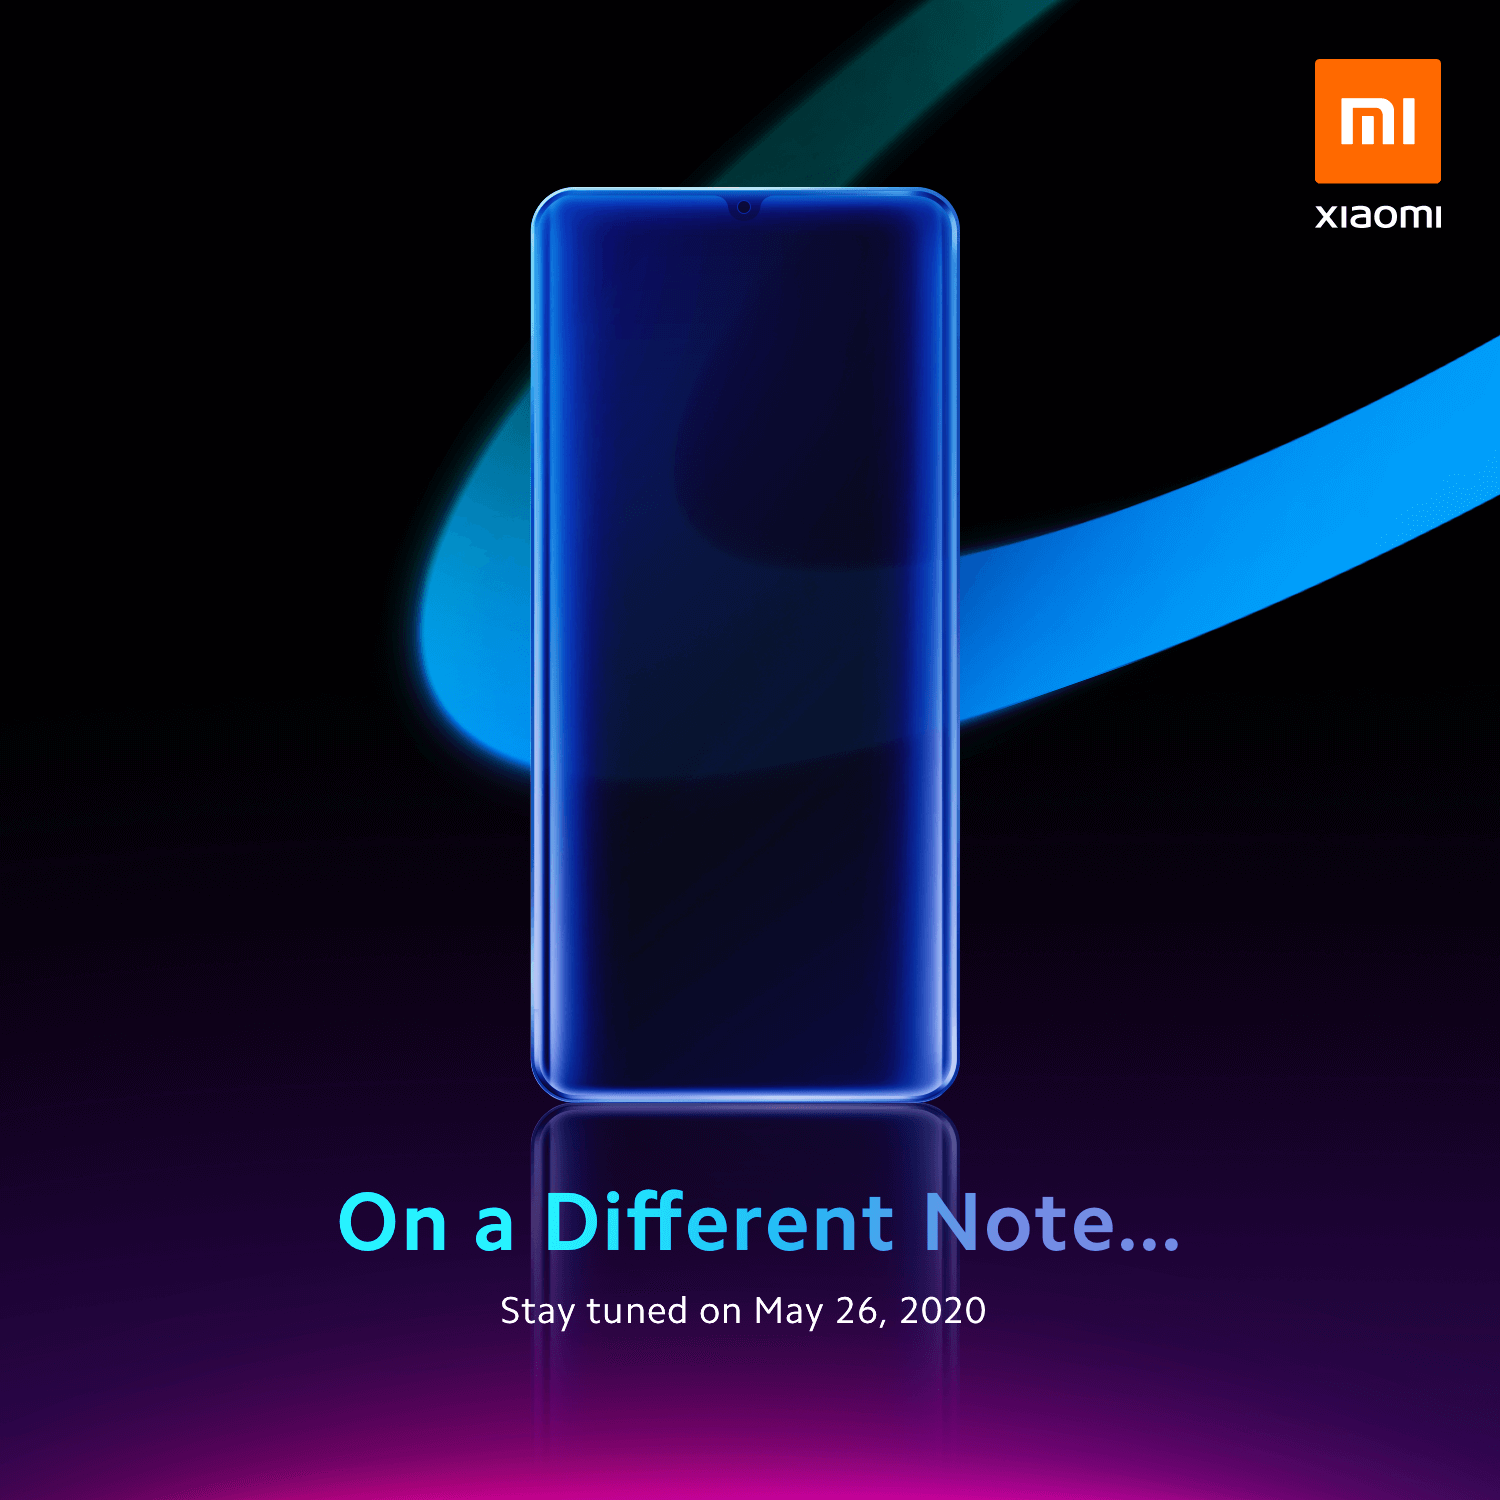 Xiaomi Teases Arrival of New Note Device in PH, Could be the Mi Note 10 Lite